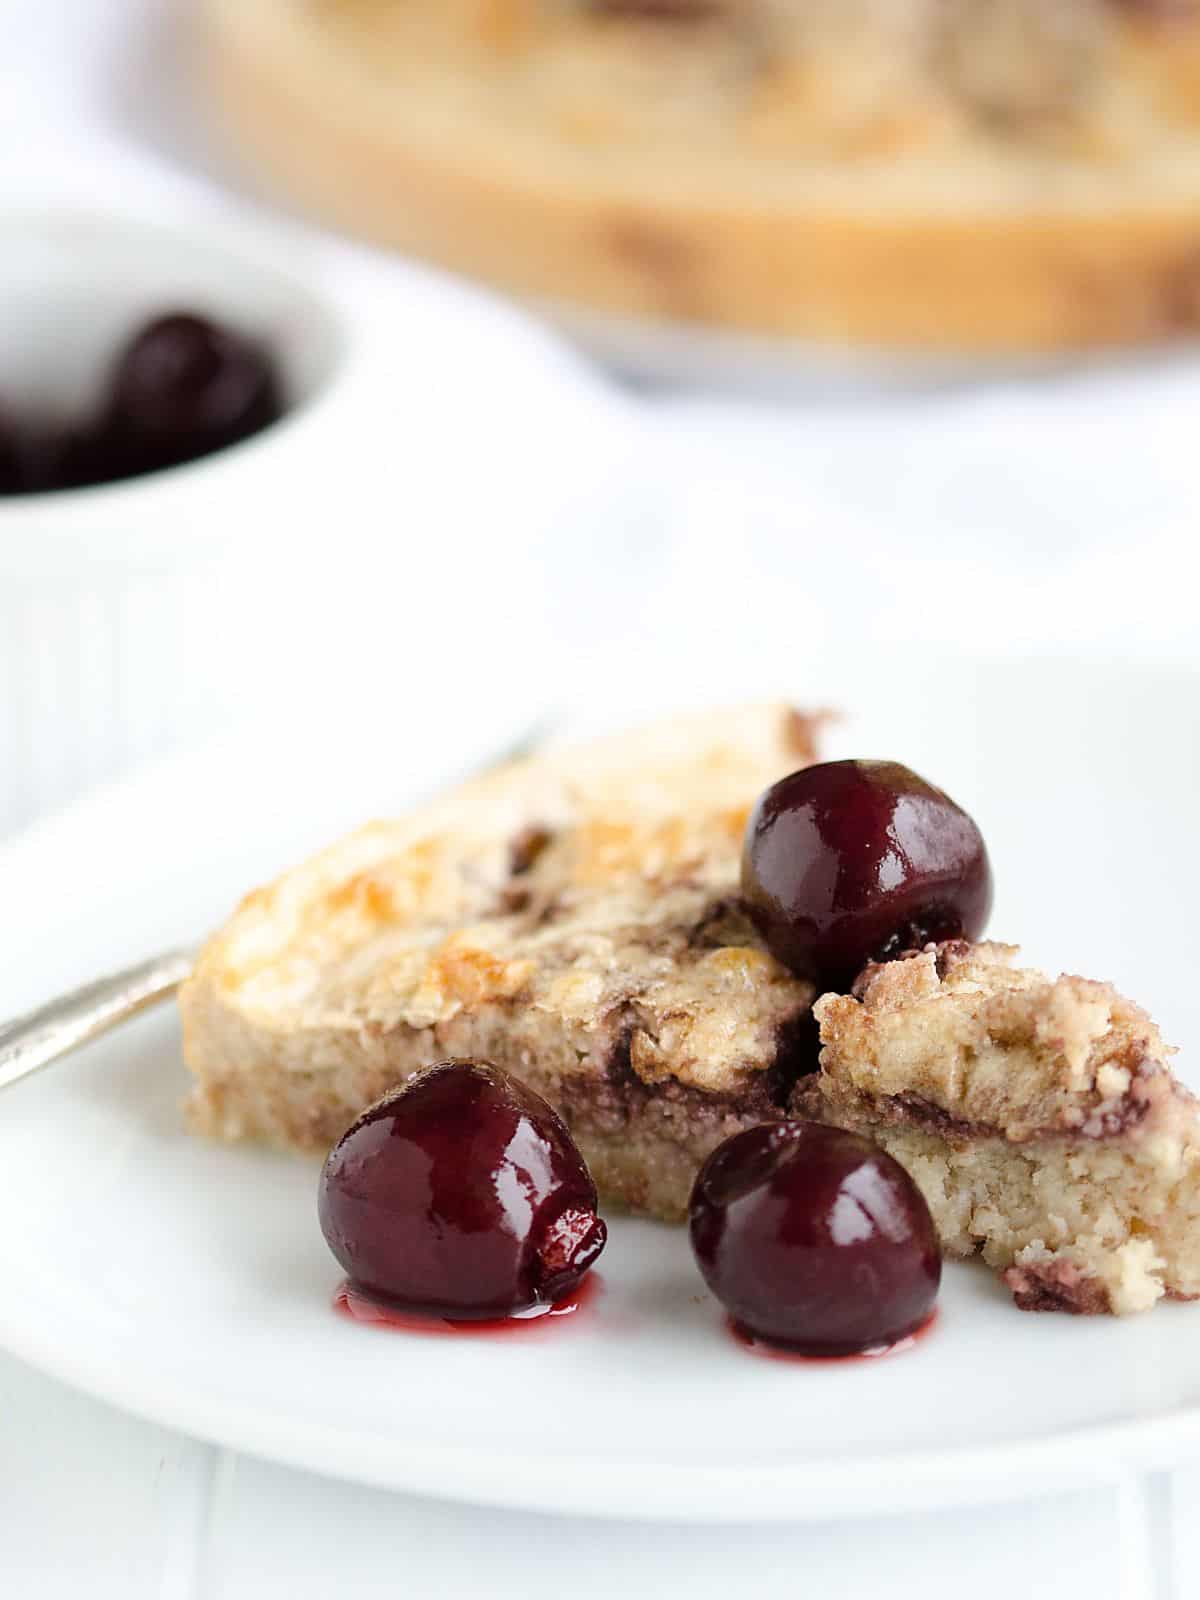 Slice of Black Cherry Breakfast Cake on a white plate with juicy black cherries.